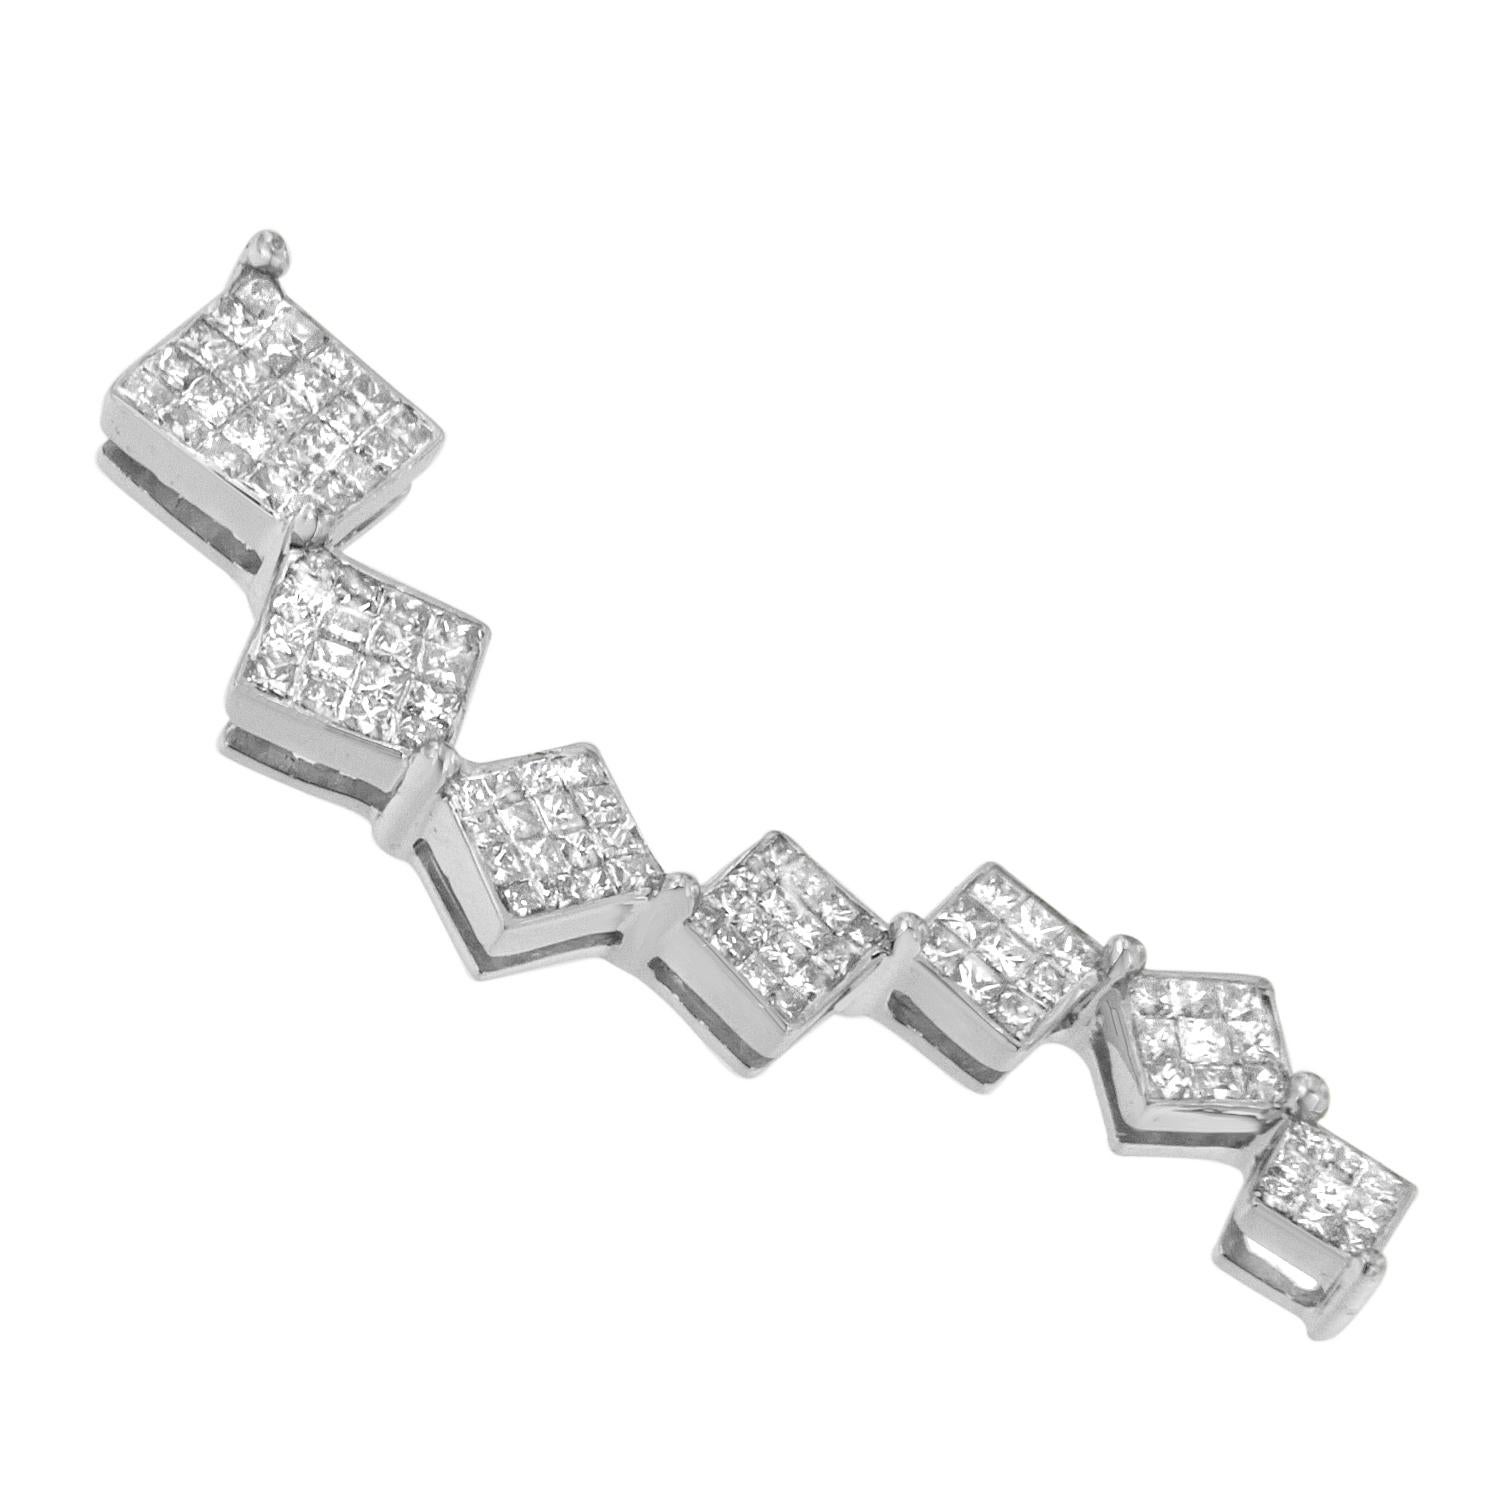 Add shine and a bit of sparkle to your day with this luxurious uniquely shaped pendant. This ten karats white gold snake journey pendant features square mounts that are connected to the corners in a curving design. Each of the squares is covered